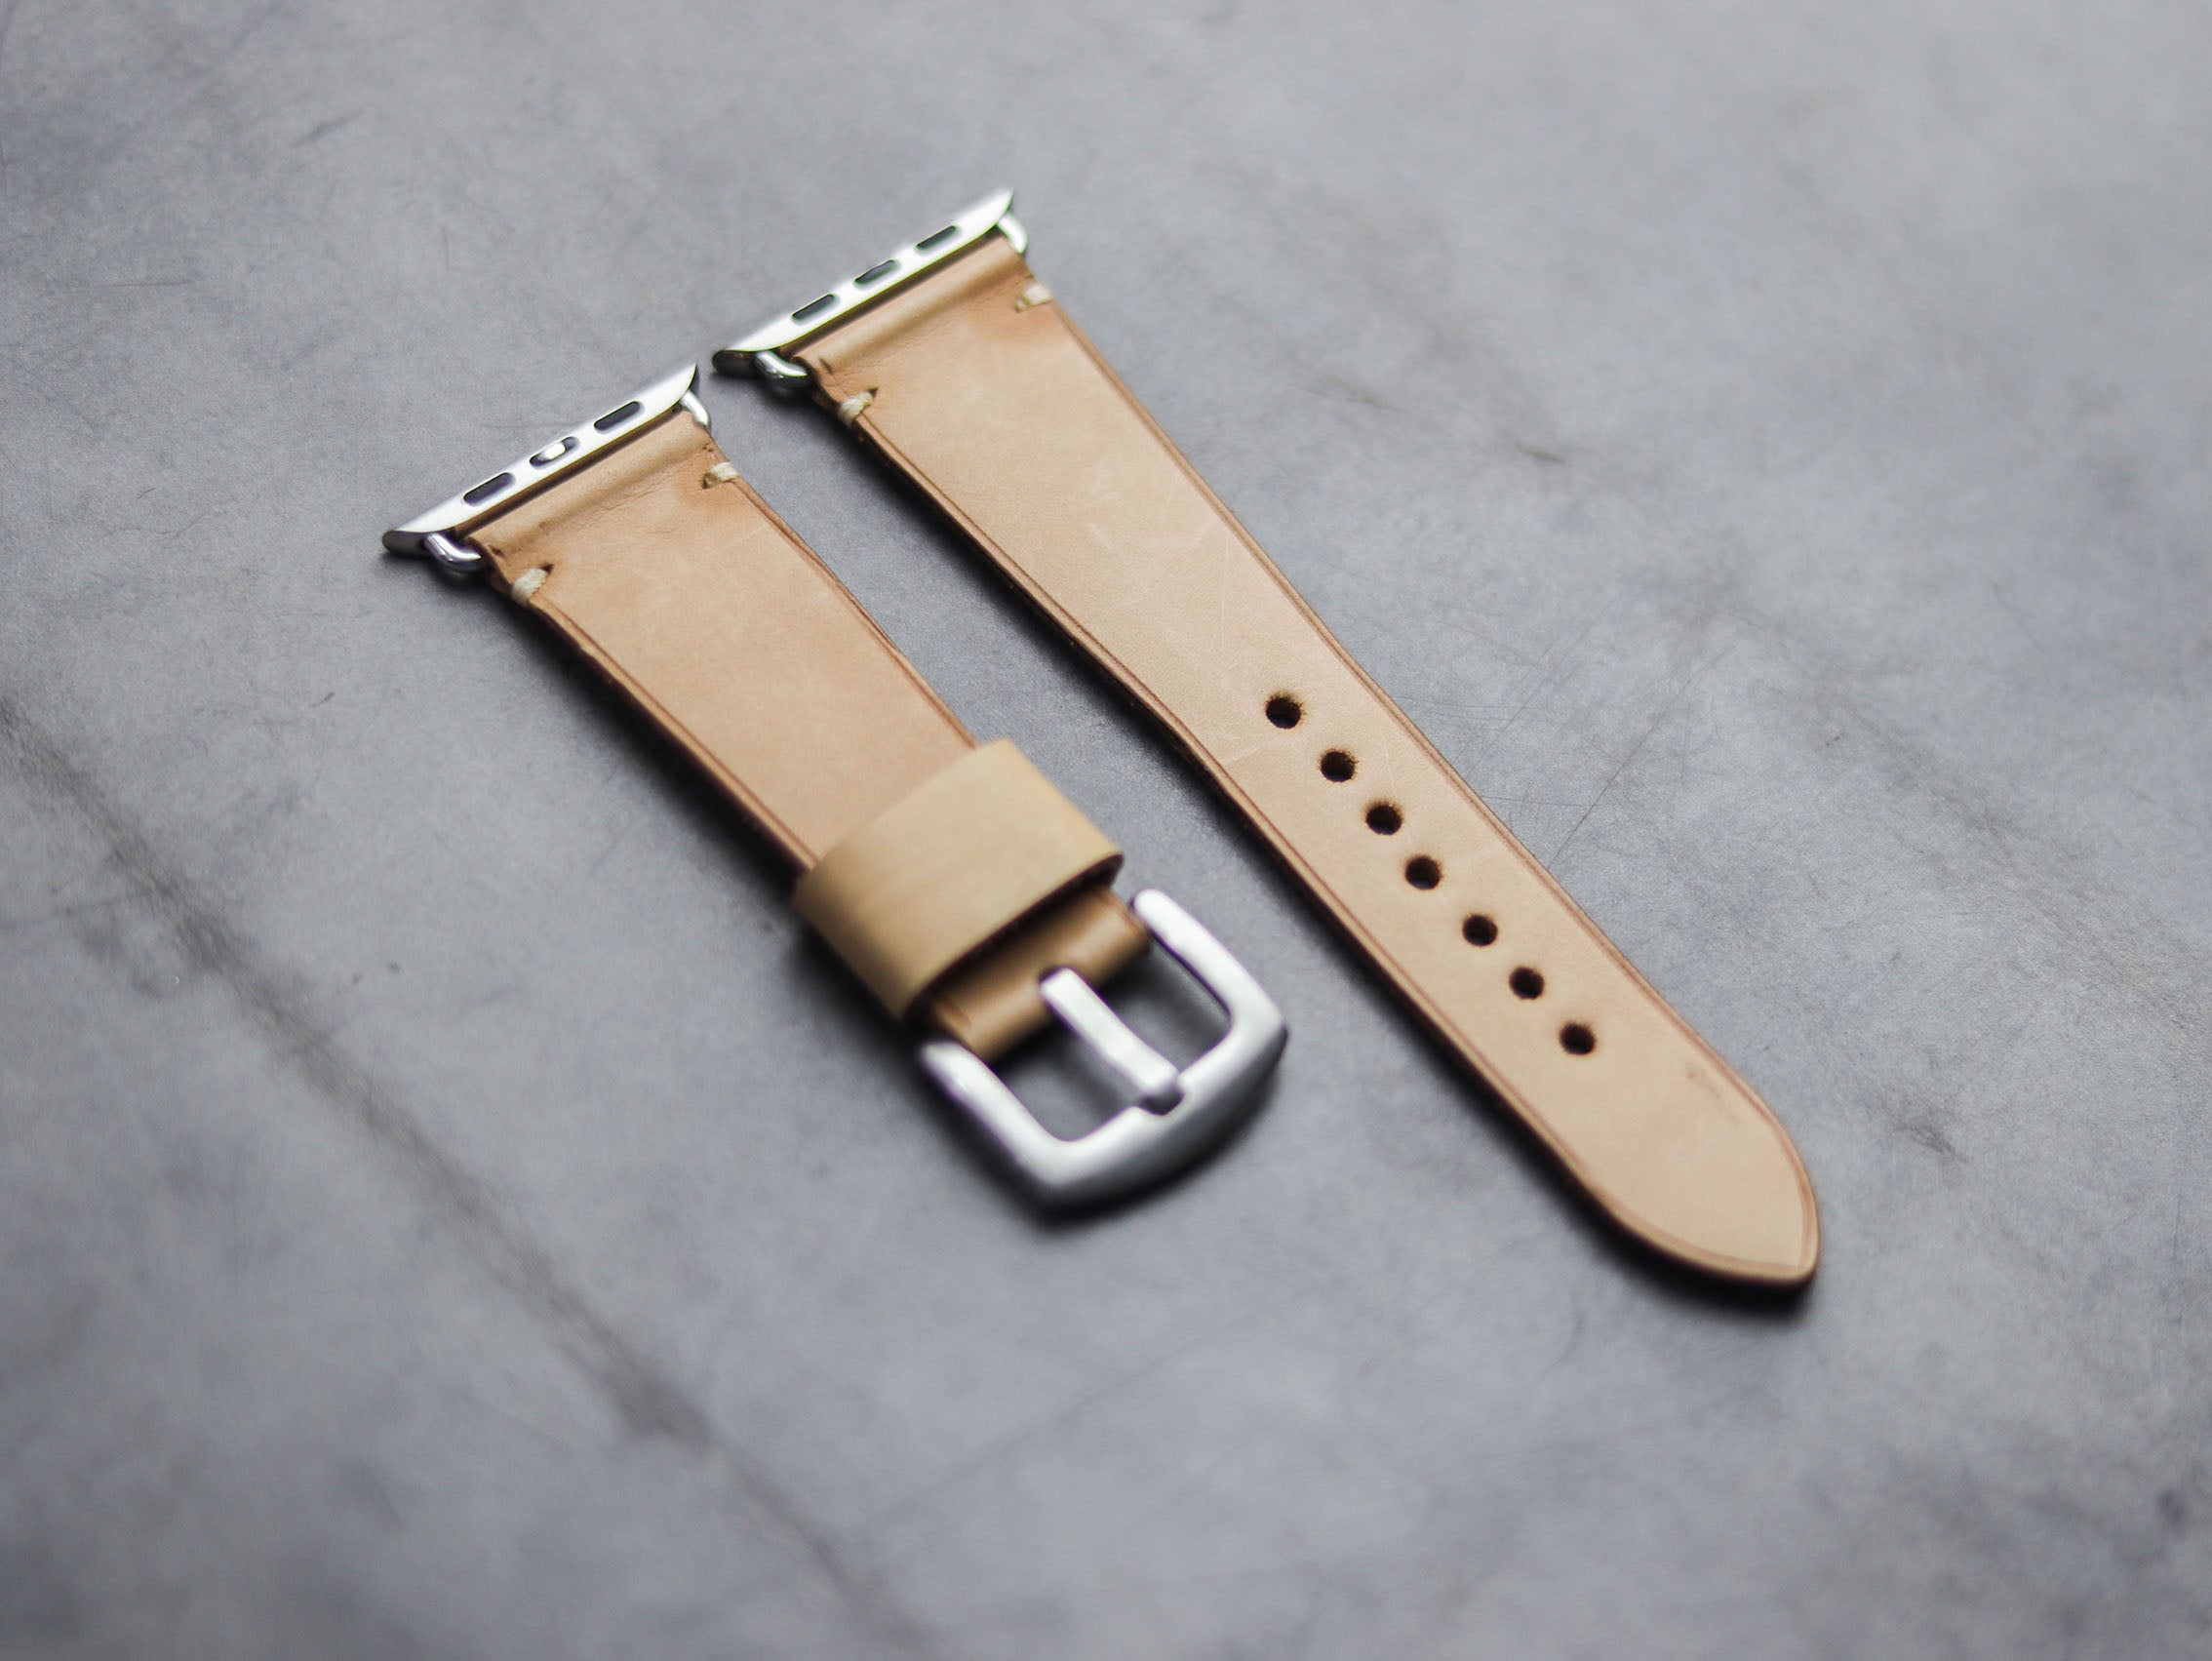 NATURAL BUTTERO MINIMAL STITCHED HAND-CRAFTED APPLE WATCH STRAPS